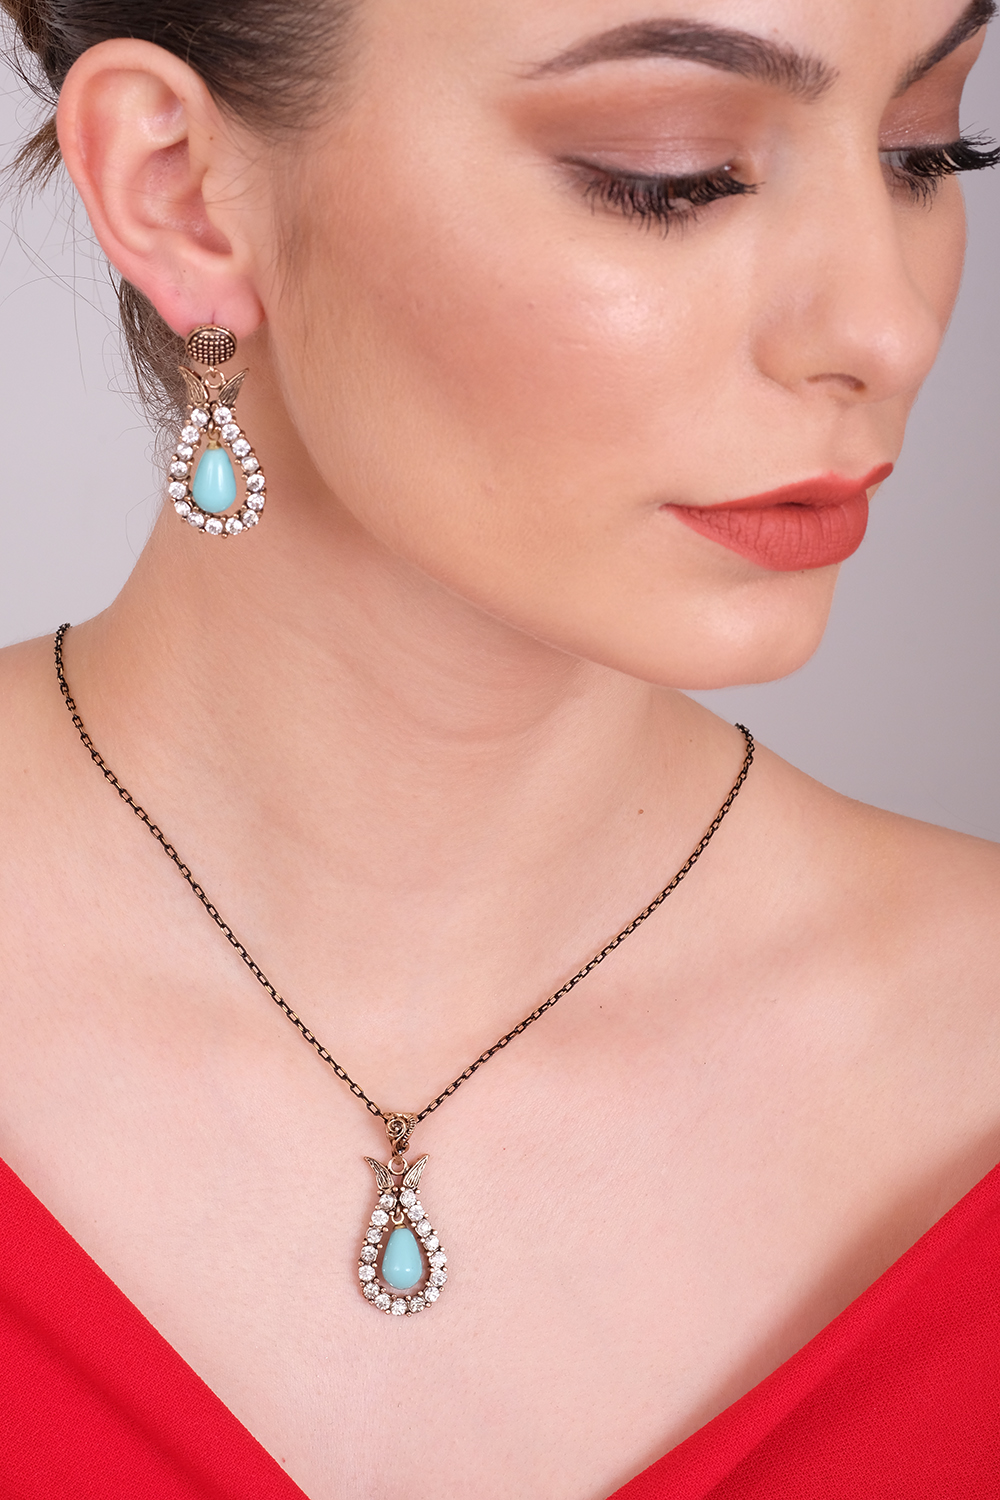 CALLISTO Necklace and Earrings Jewelry Set